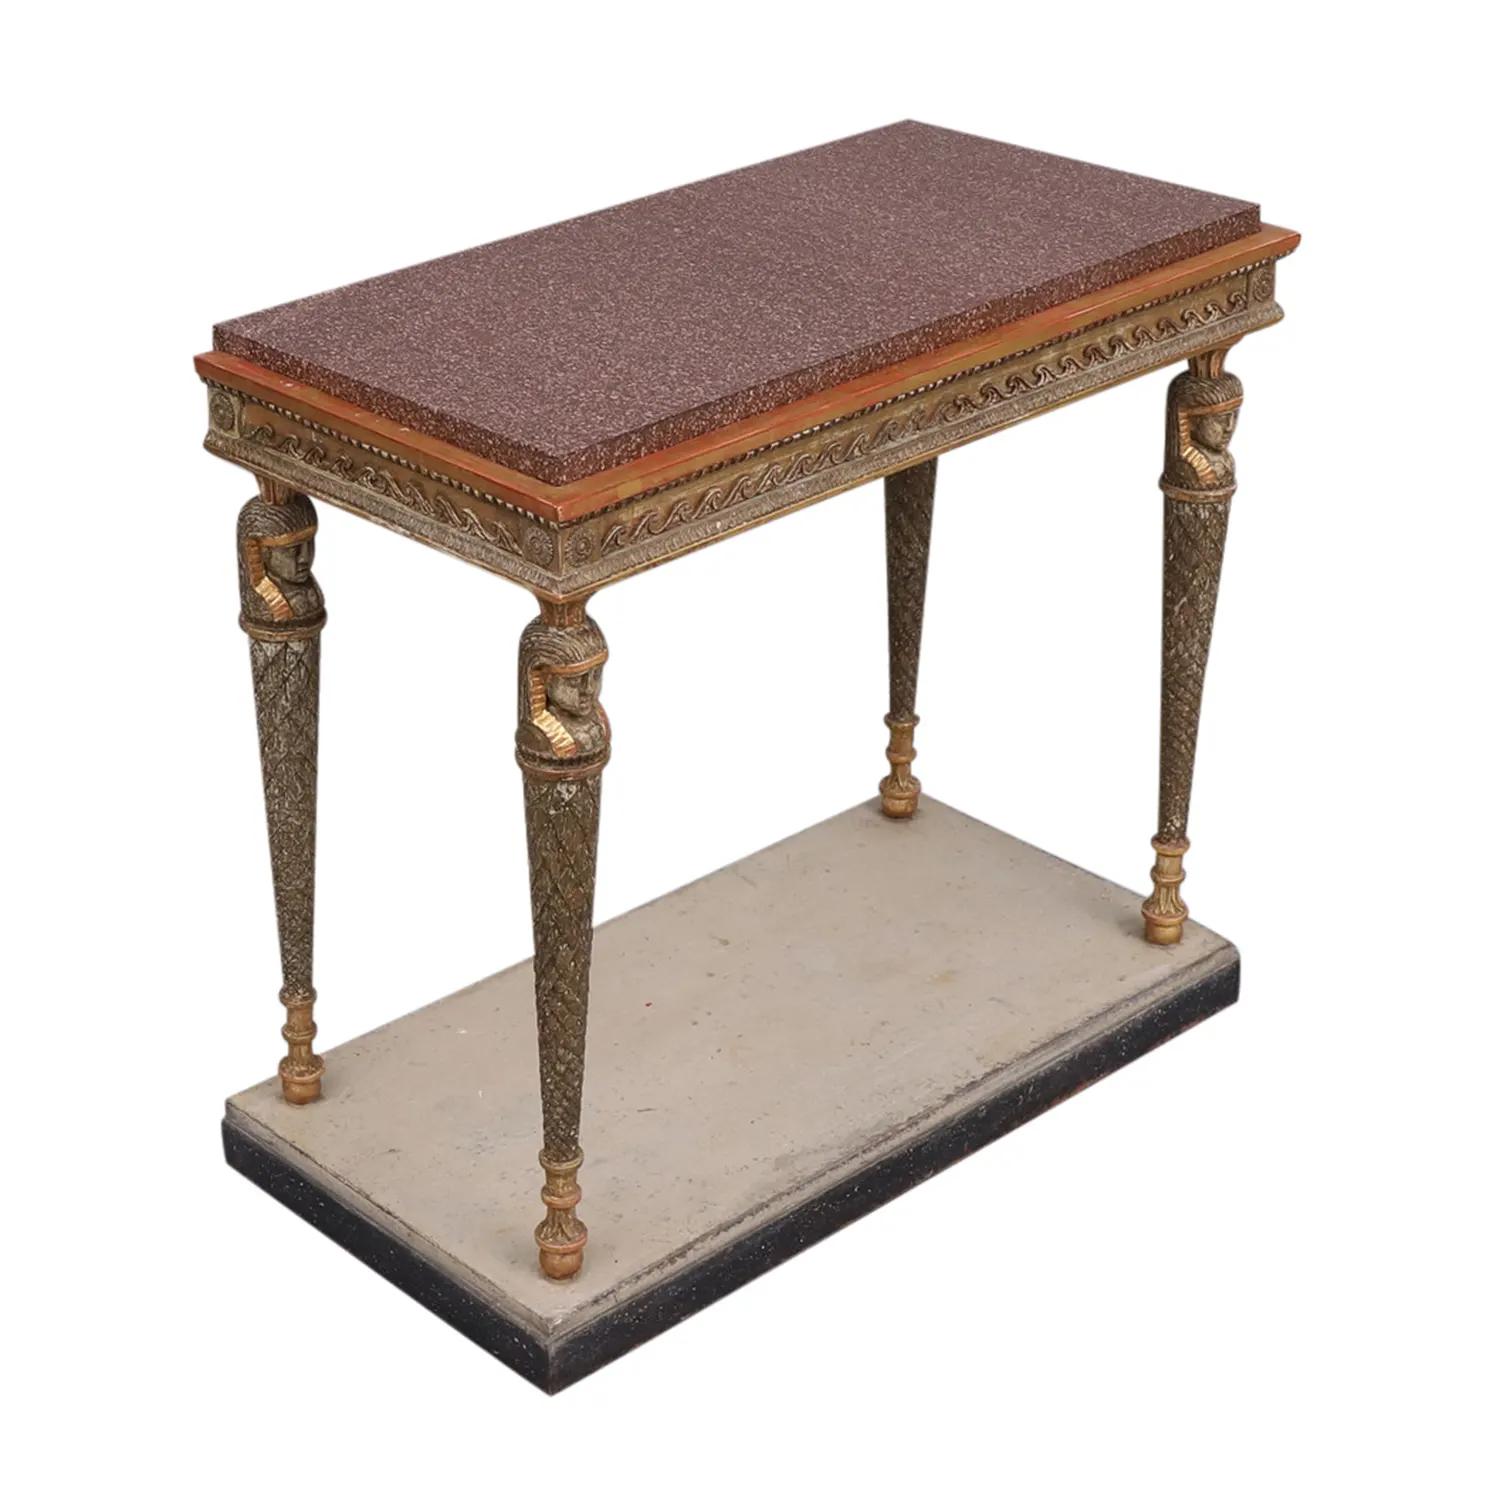 A gold, antique Swedish Gustavian freestanding console table made of hand crafted gilded, painted Pinewood in the Egyptian style with a crystal red porphyry top, designed and produced most likely by Jonas Frisk in good condition. The edges, borders